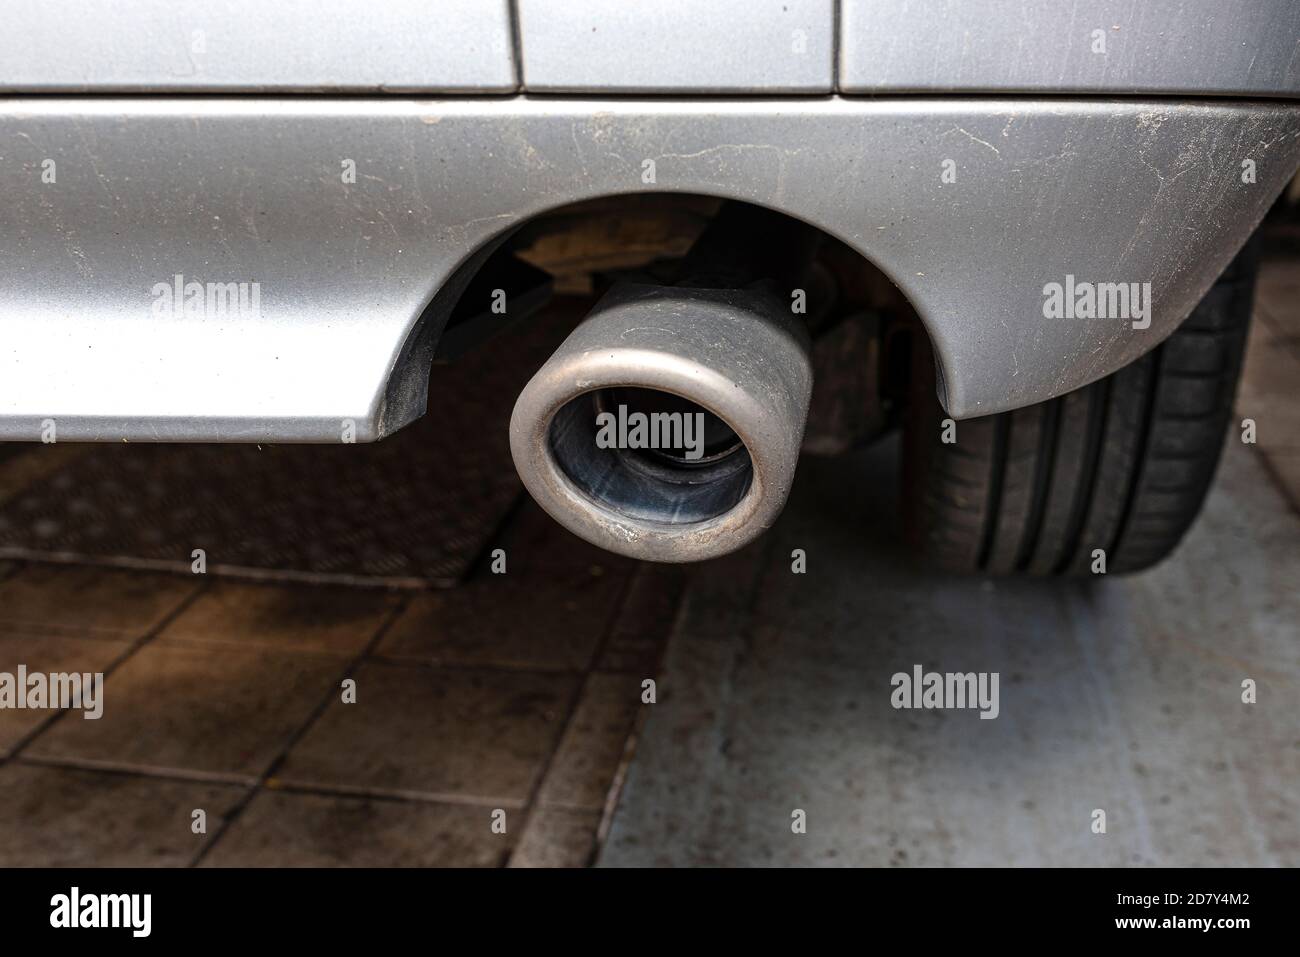 The exhaust system in the diesel car seen up close, view from rear of muffler. Stock Photo